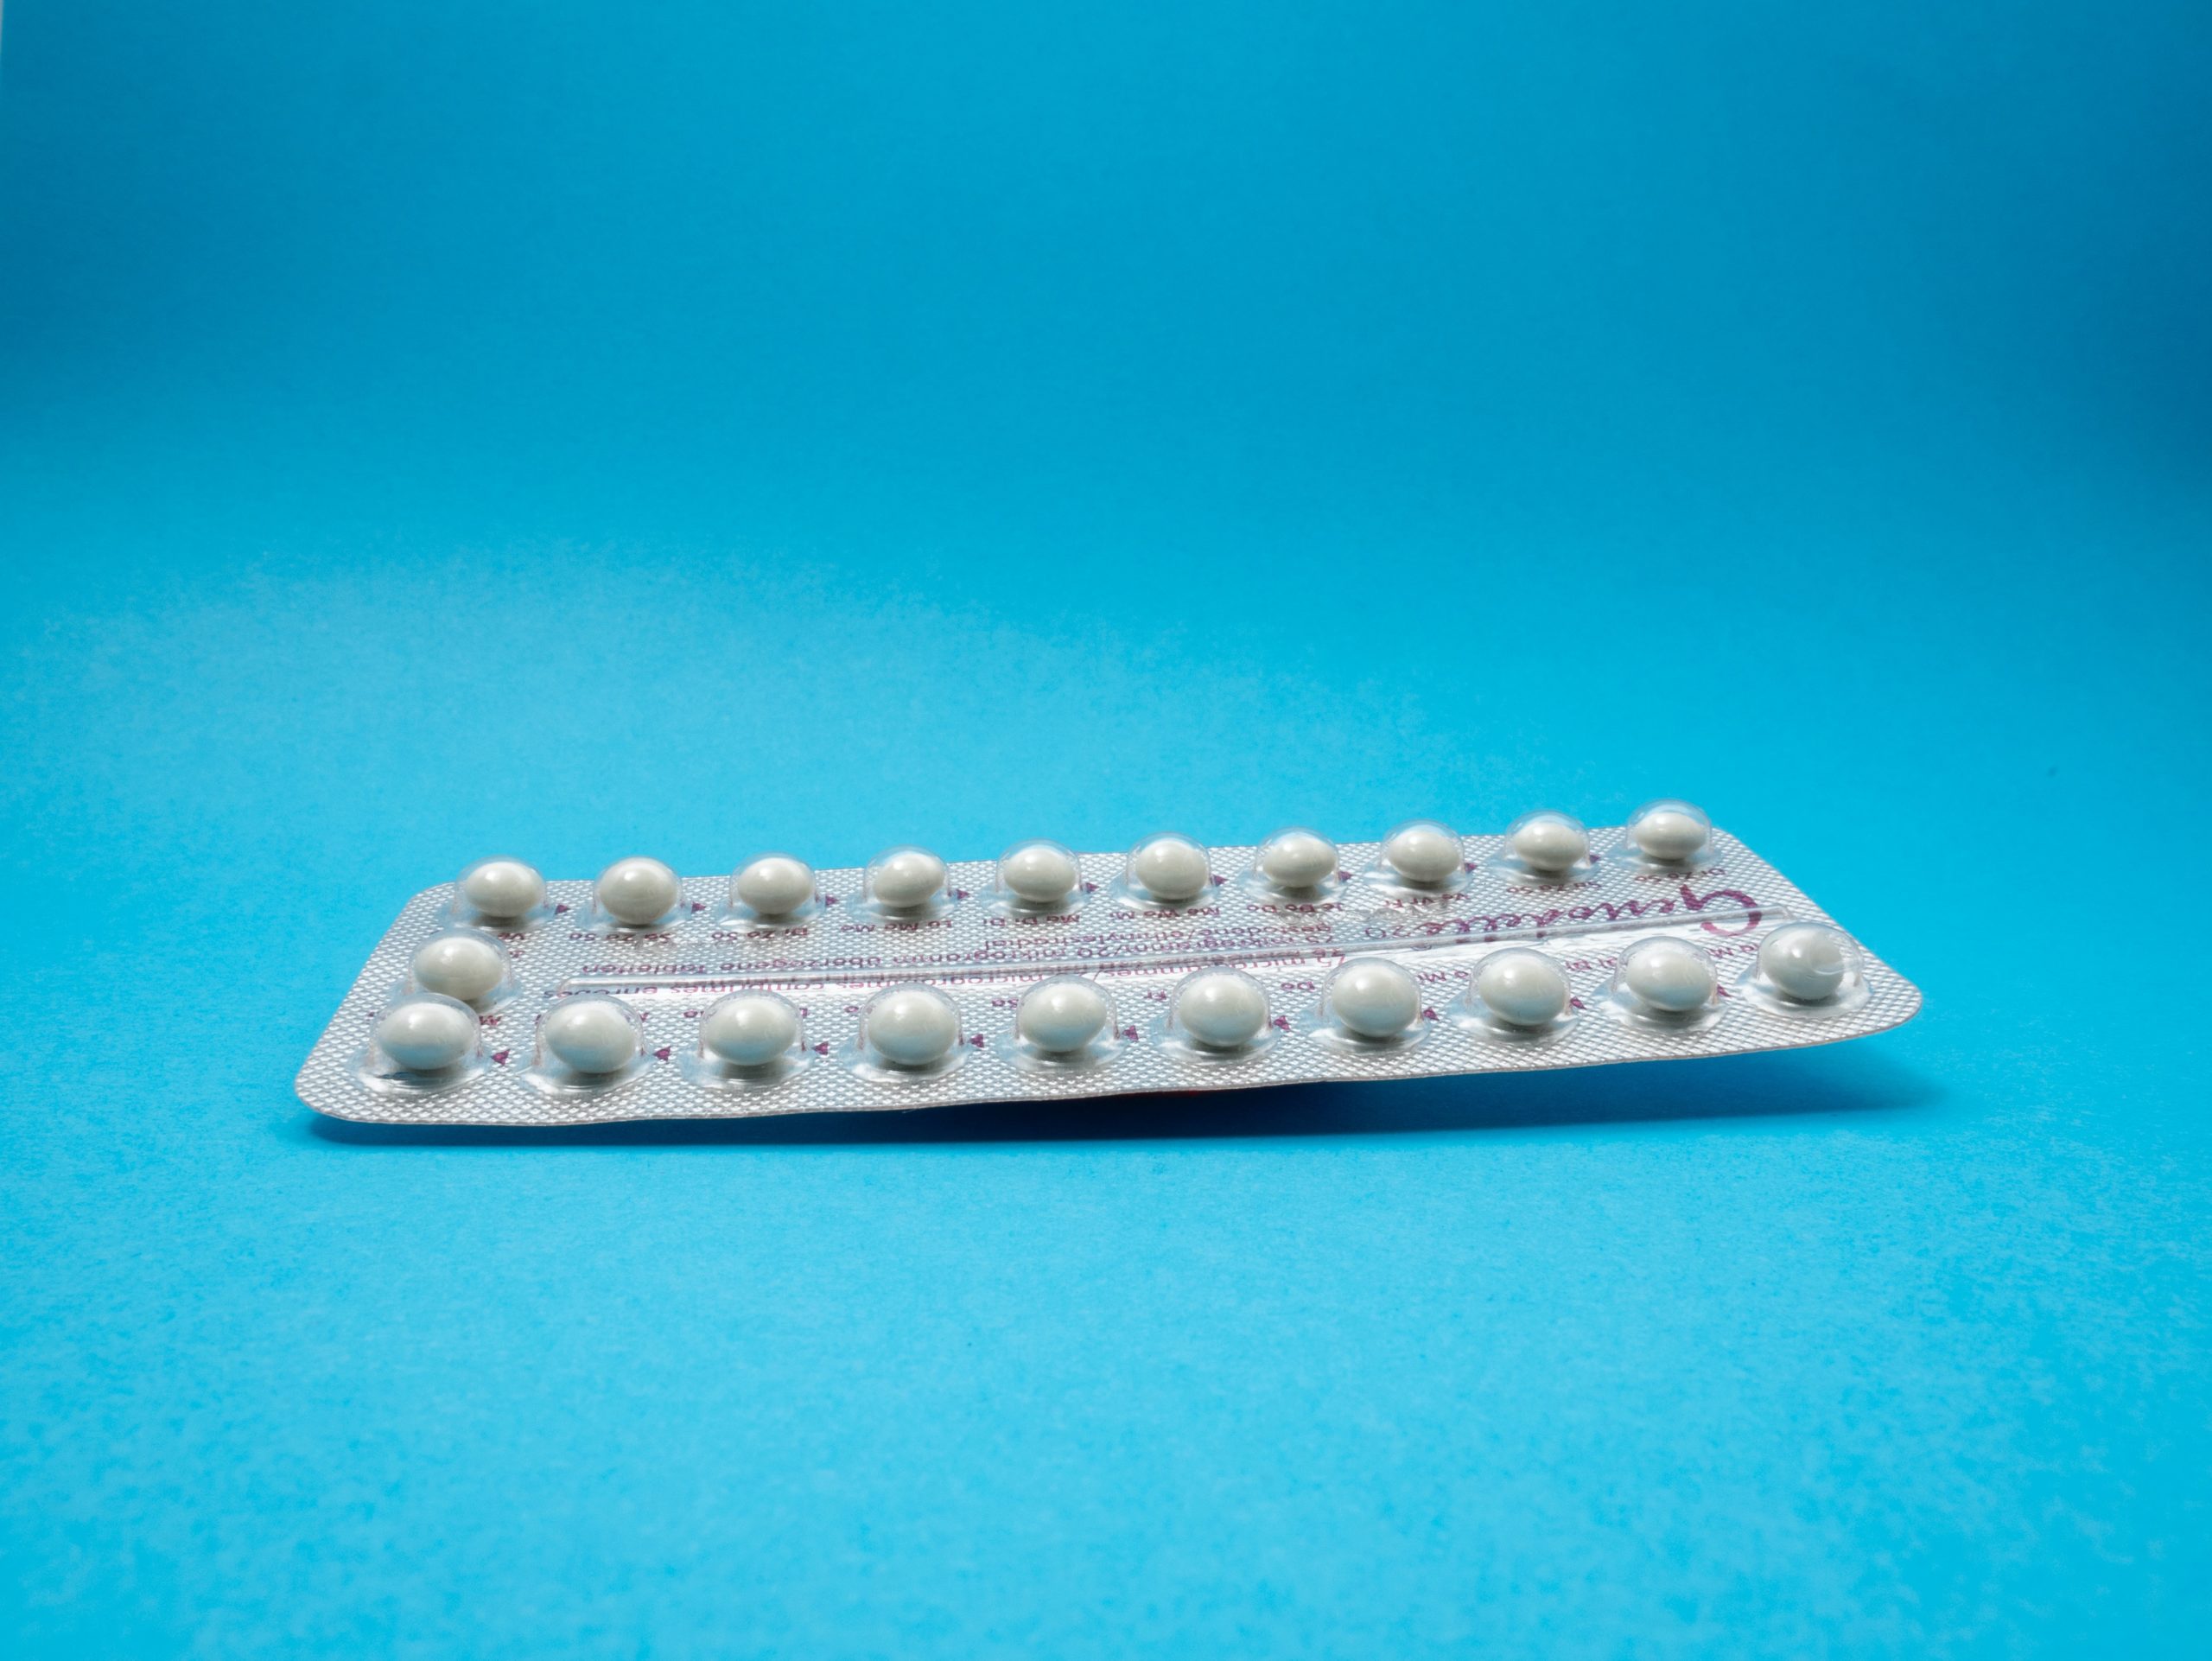 Combined Hormonal Oral Contraceptive (the Pill)